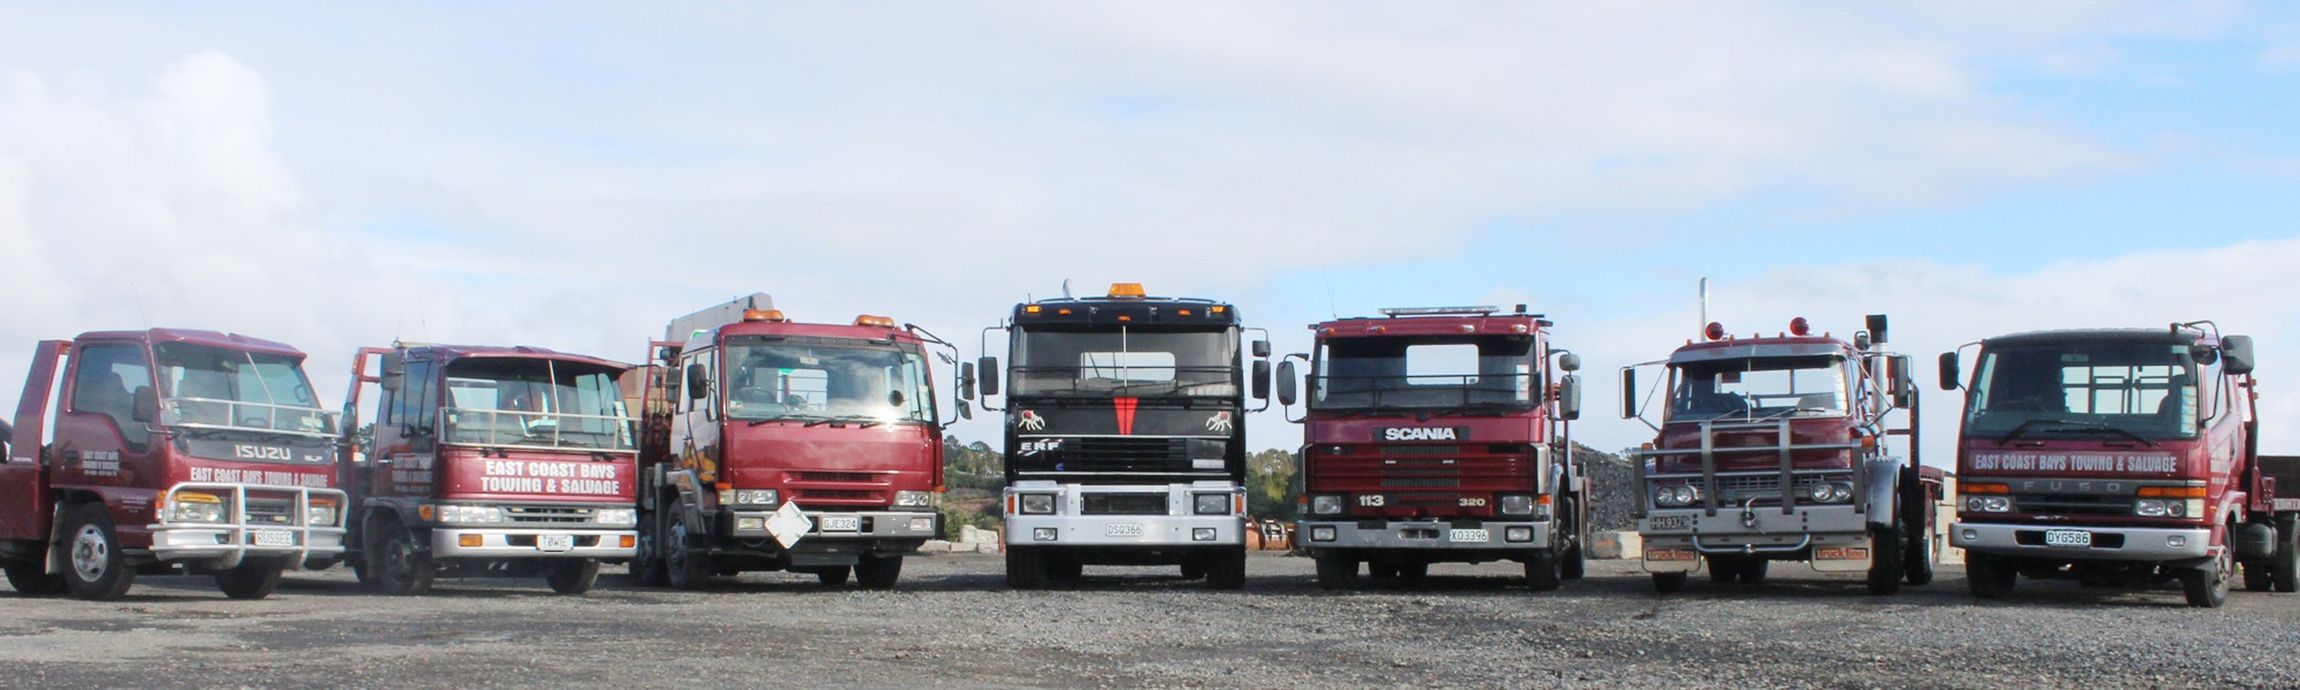 Towing vehicles used by the professionals